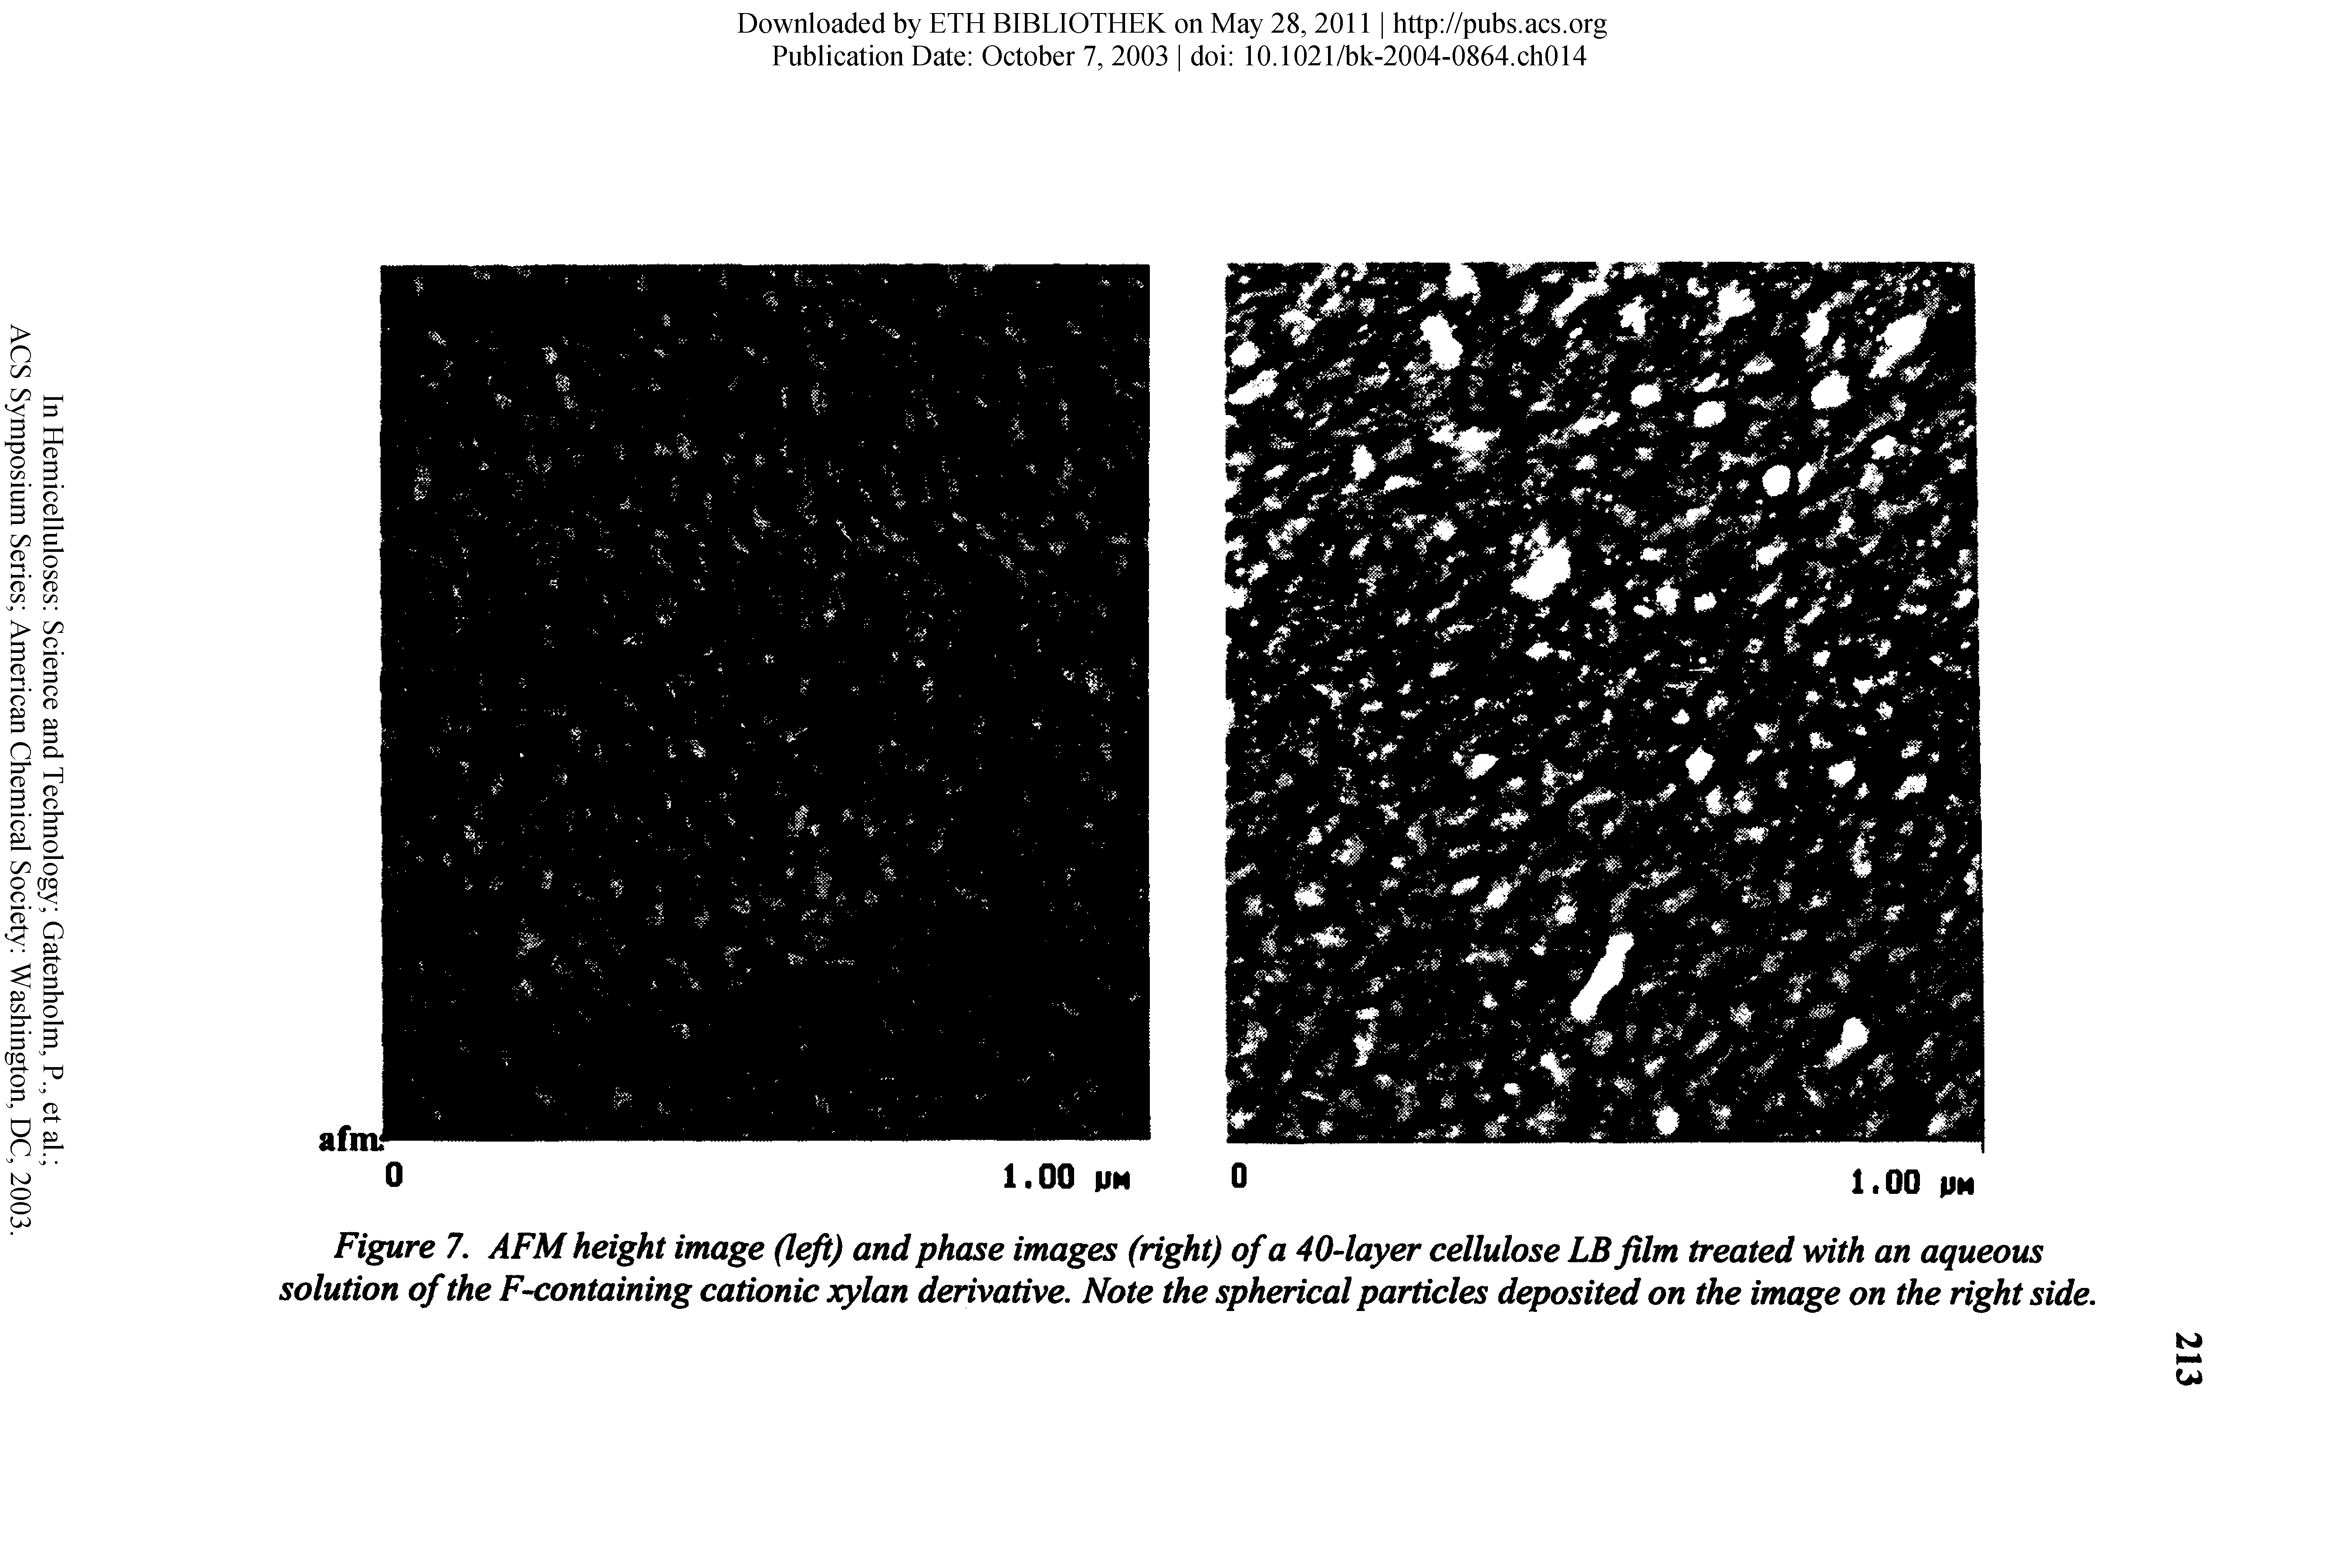 Figure 7. AFM height image (left) and phase images (right) of a 40-layer cellulose LB film treated with an aqueous solution of the F-containing cationic xylan derivative. Note the spherical particles deposited on the image on the right side.